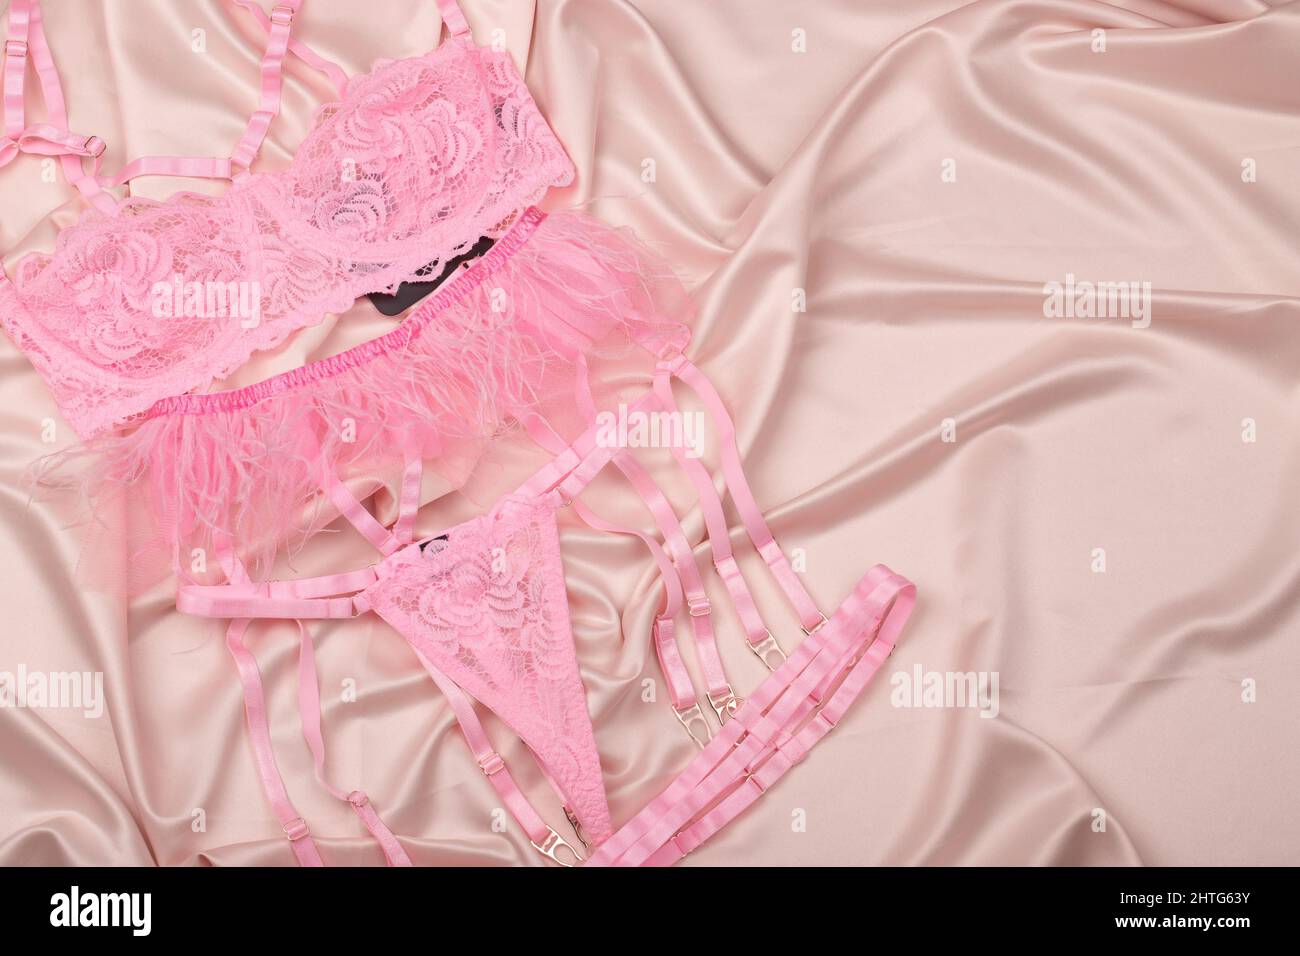 Glamorous stylish sexy lace lingerie on a satin background. Women's bra, panties, erotic clothes. Gift, shopping and fashion concept.Copy space. Stock Photo